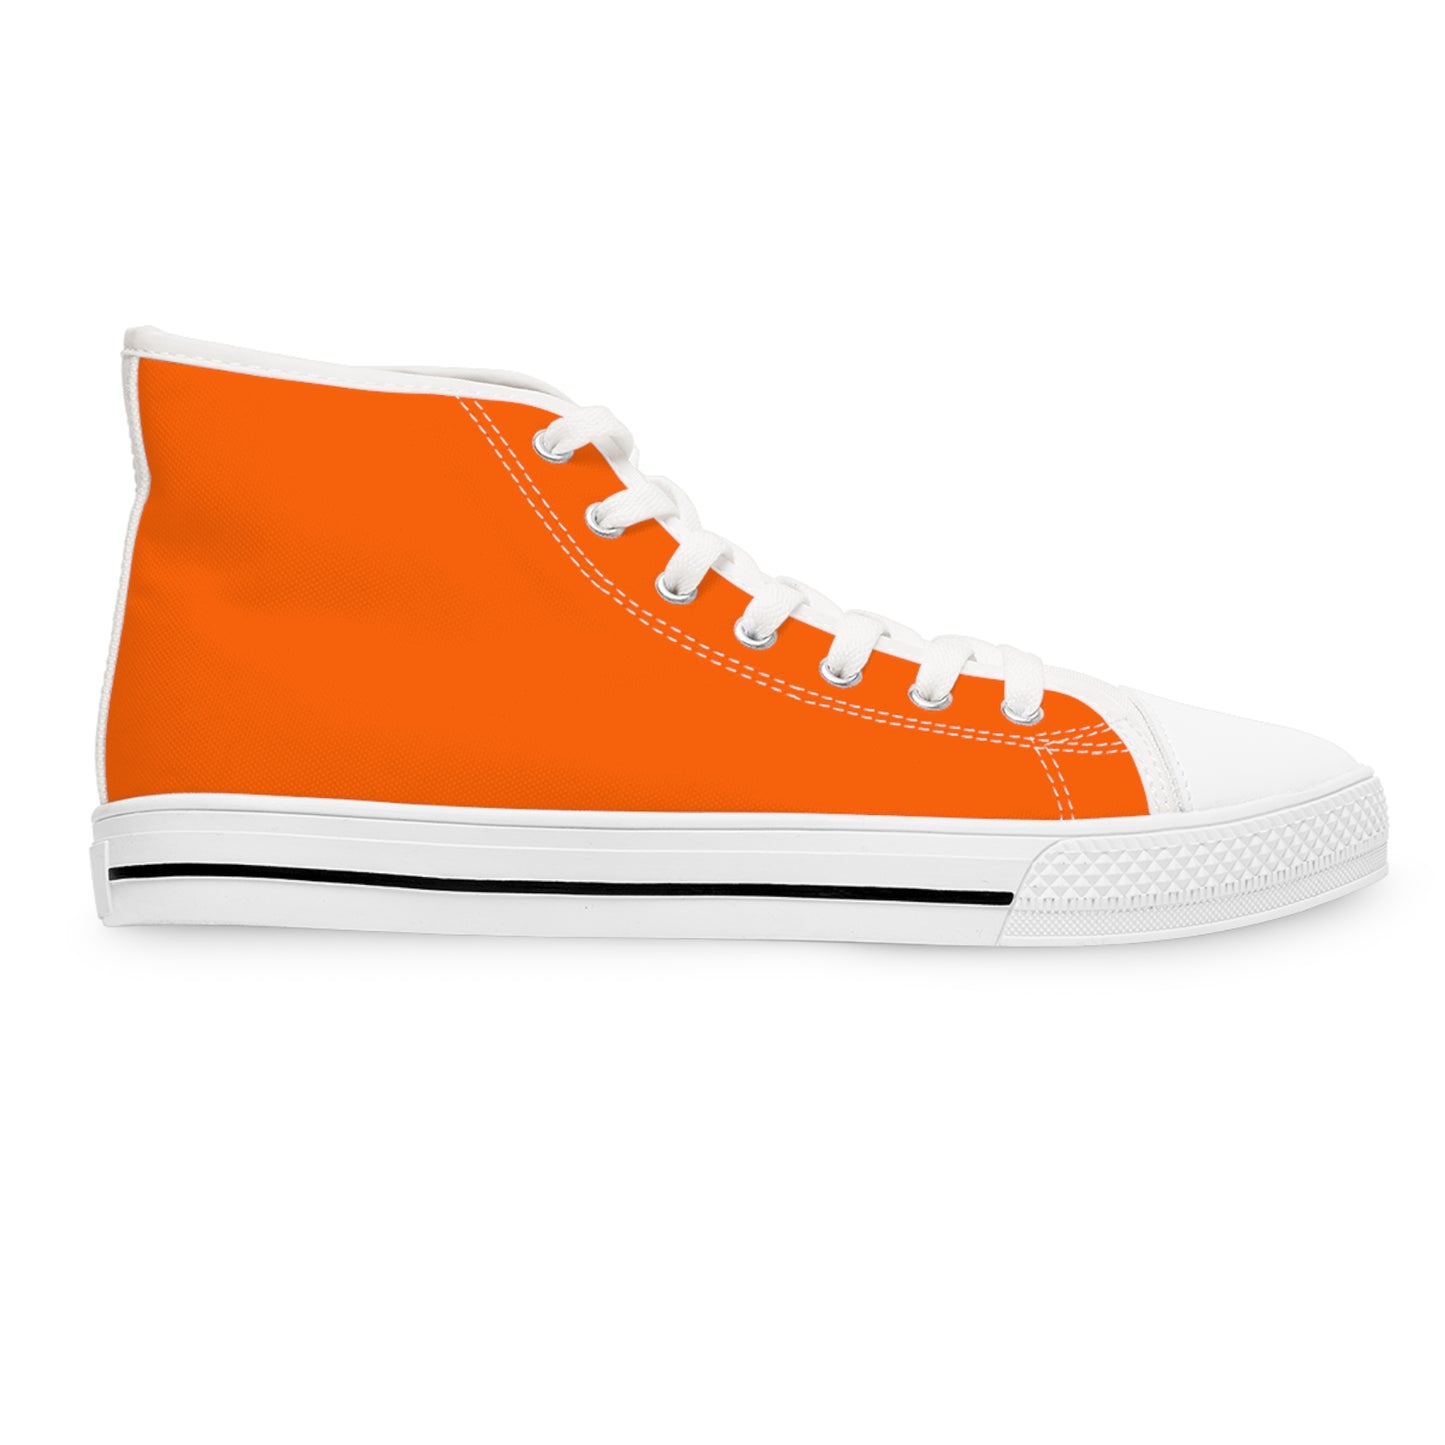 Women's Canvas High Top Solid Color Sneakers - Electric Orange US 12 White sole